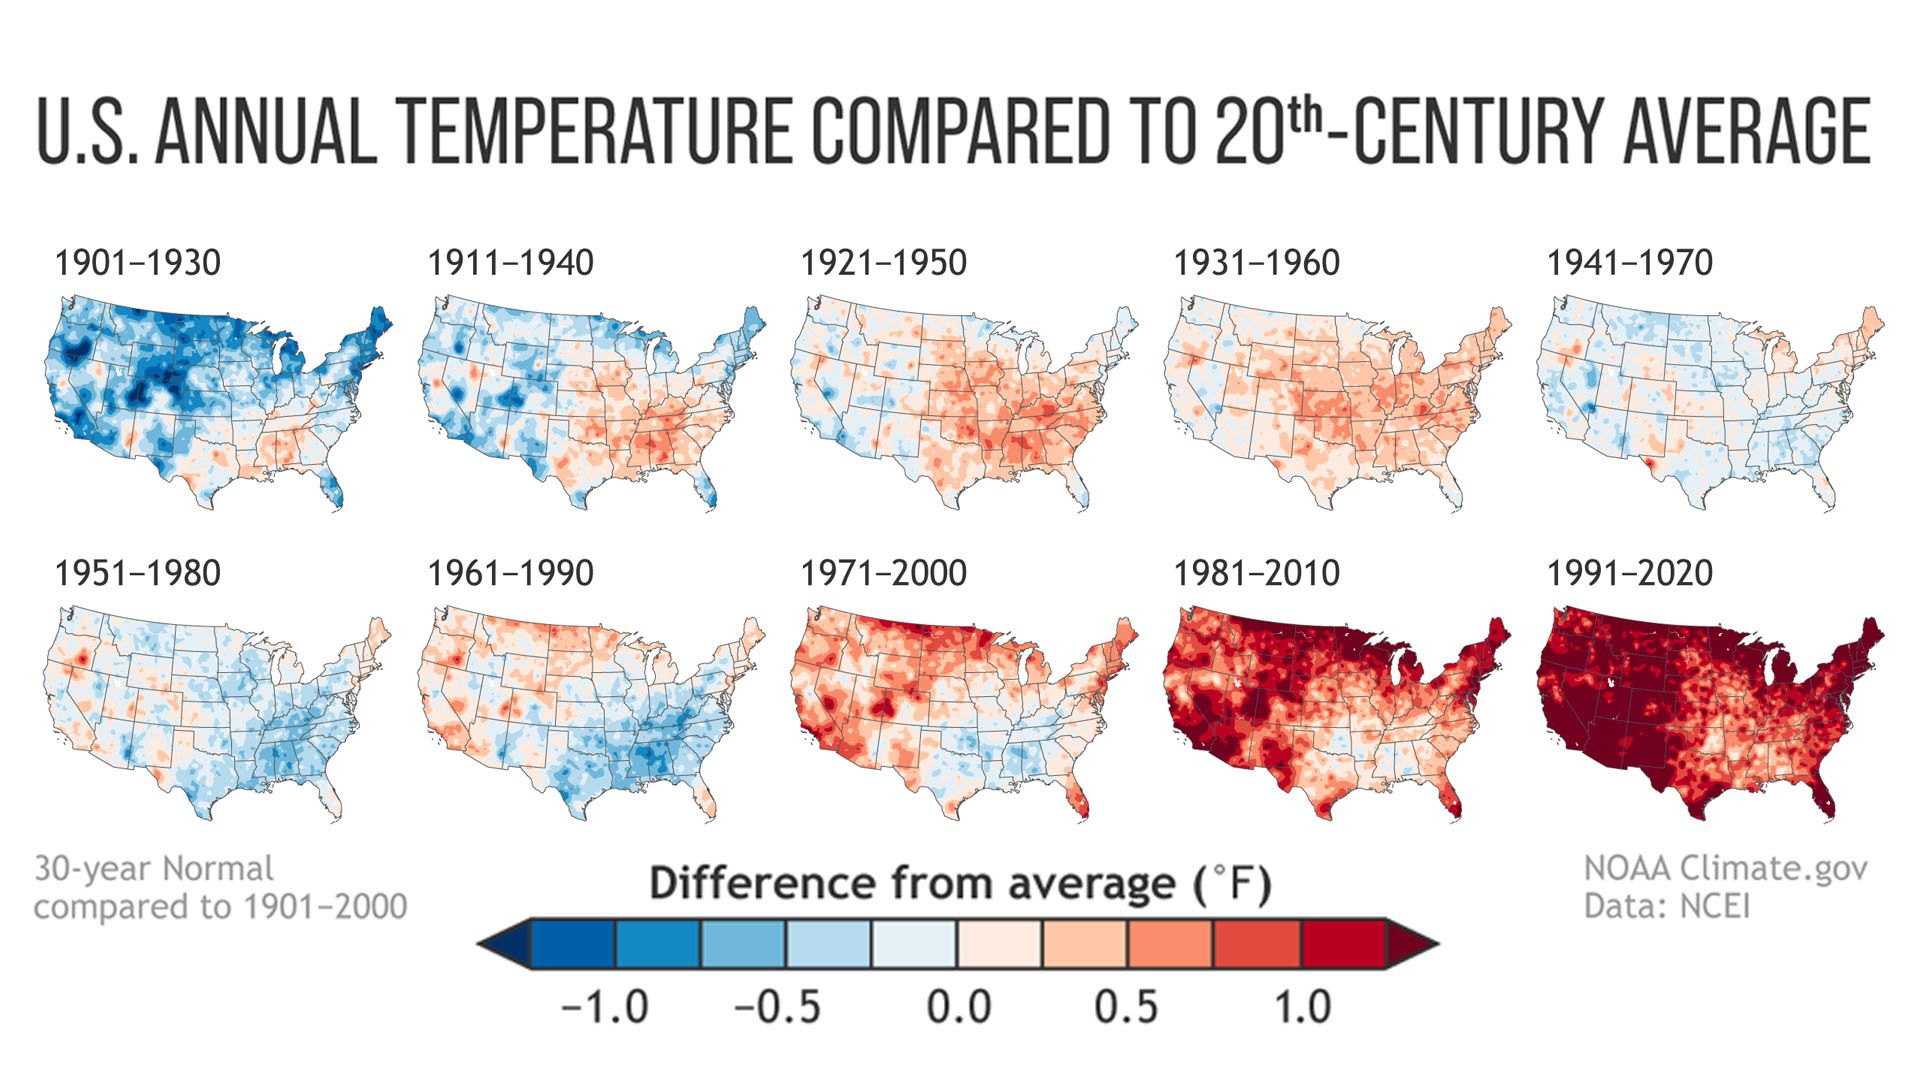 Maps of temperatures across the United States.